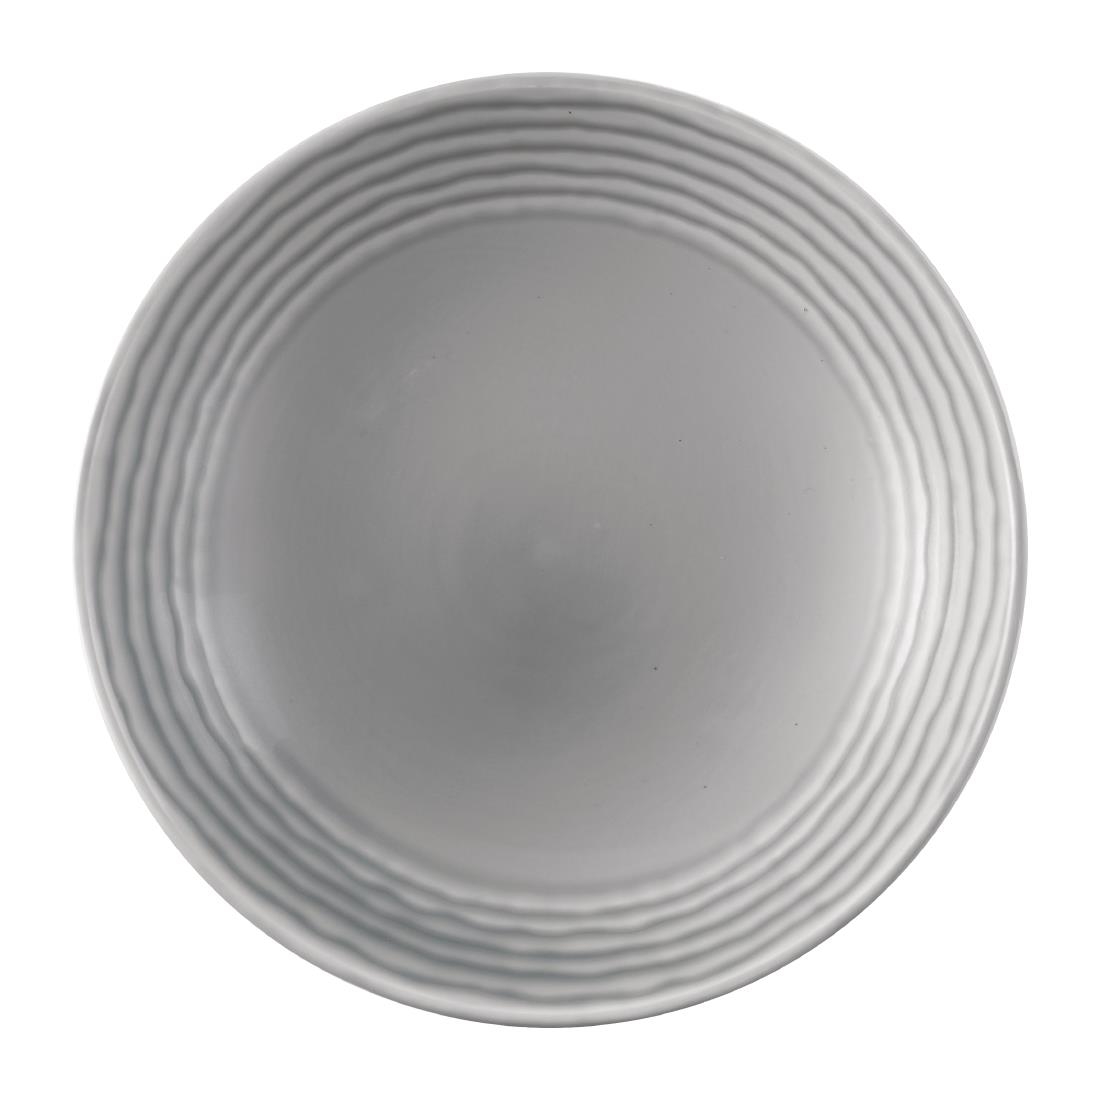 Dudson Harvest Norse Deep Coupe Plate Grey 254mm (Pack of 12)